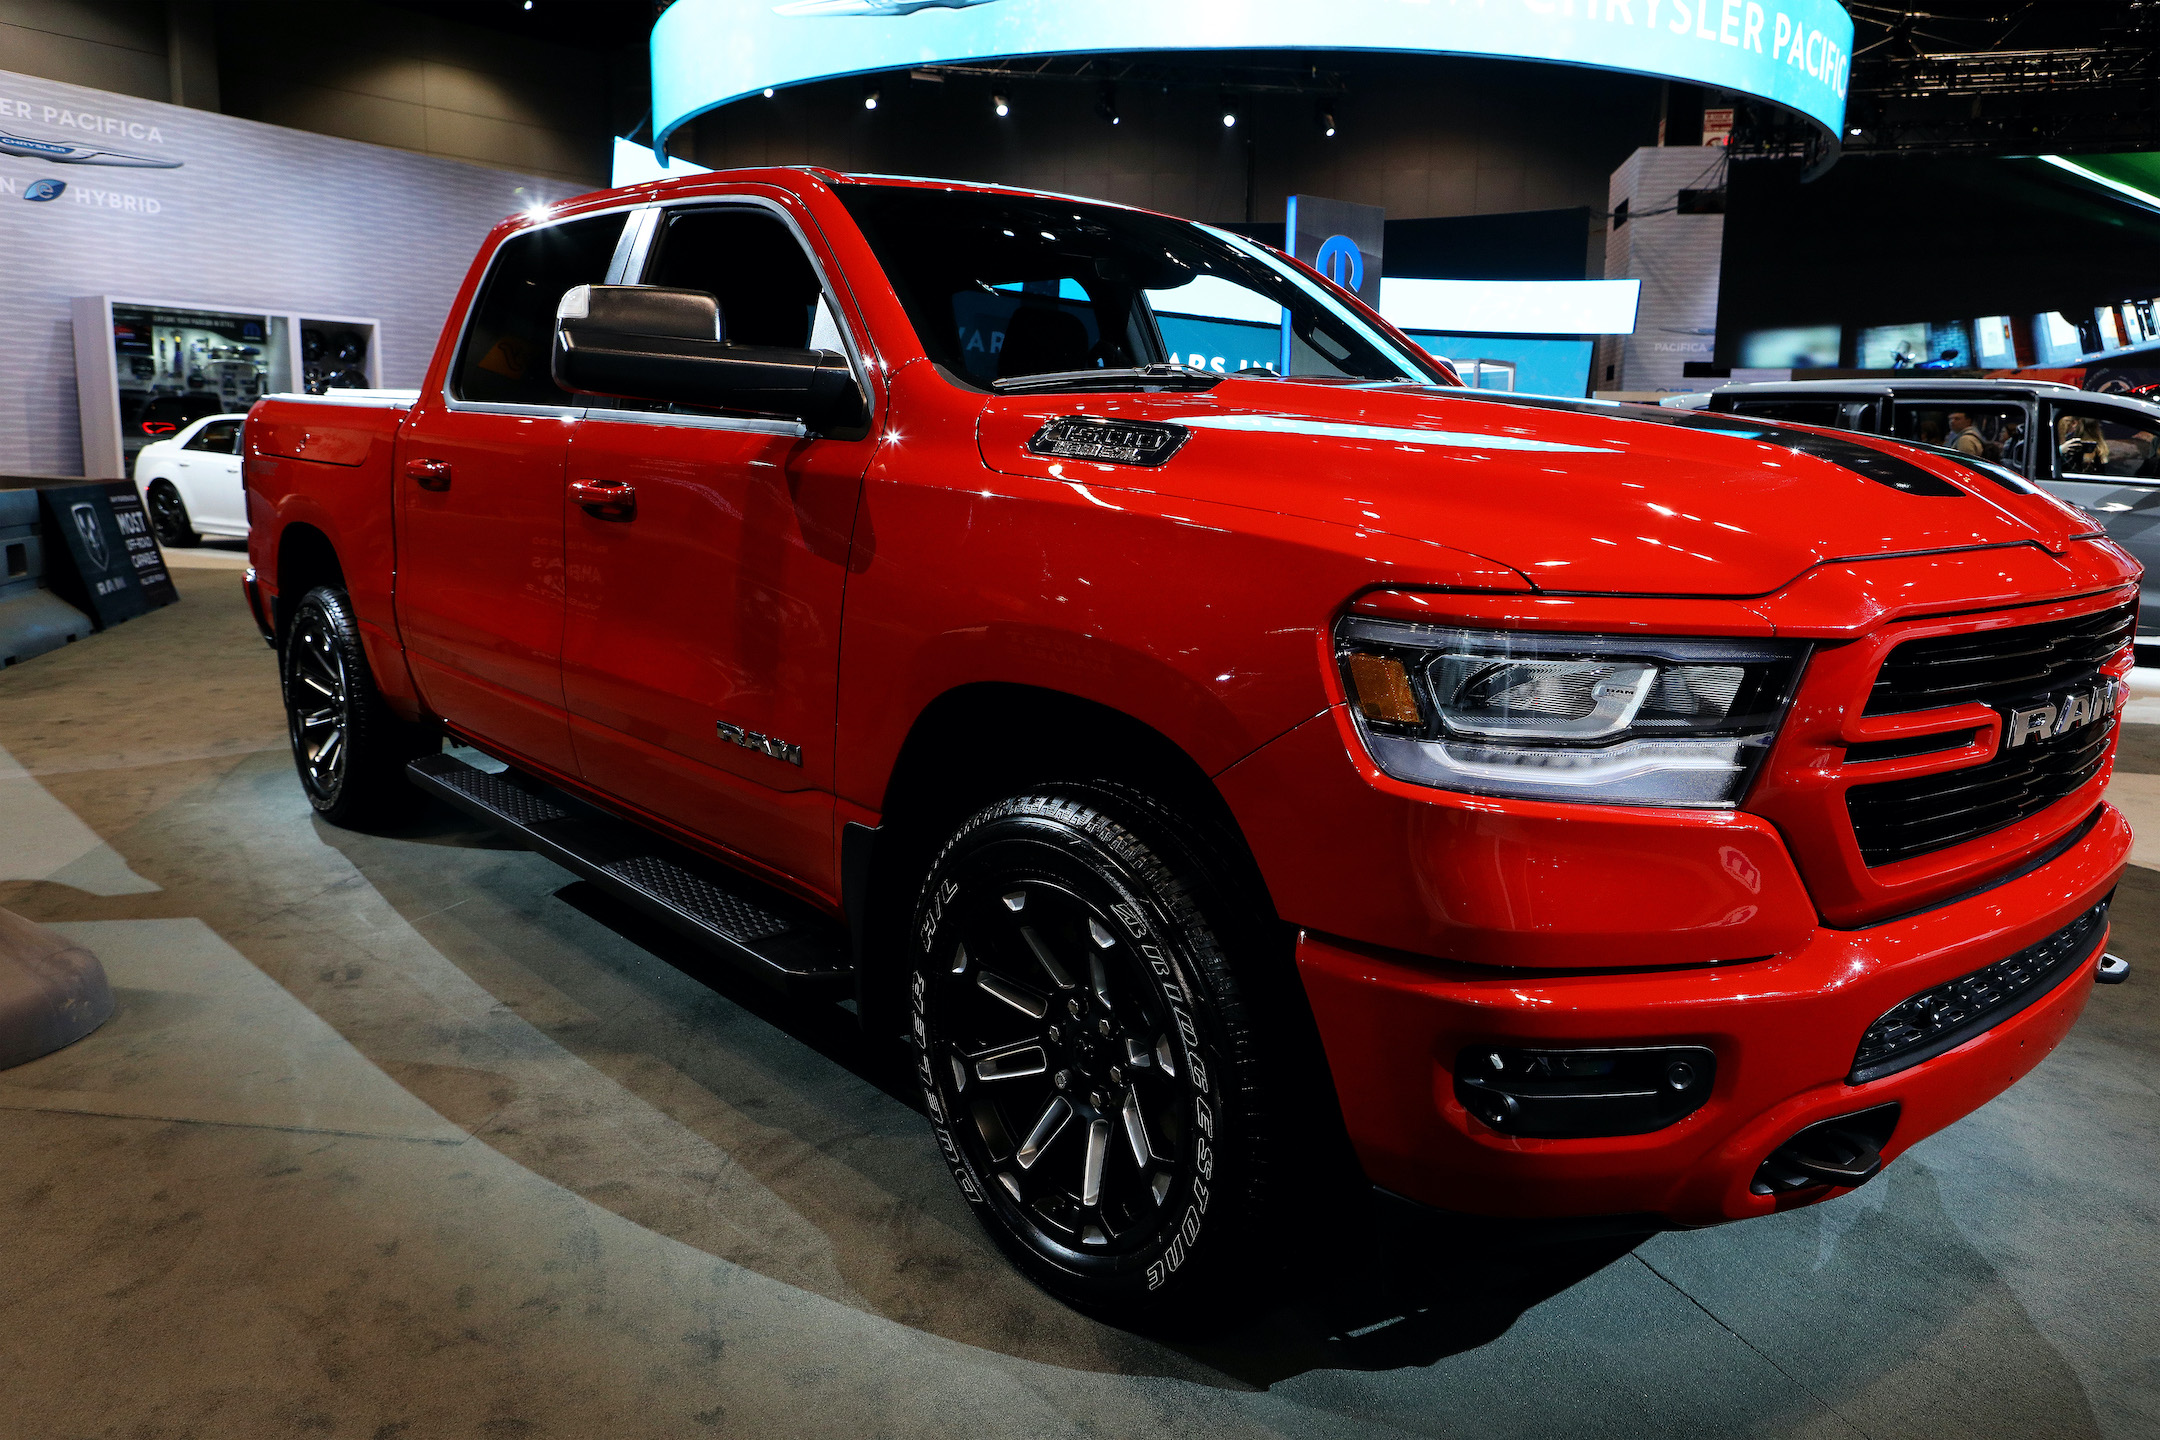 2020 Mopar-Modified RAM 1500 Big Horn Crew Cab is on display at the 112th Annual Chicago Auto Show